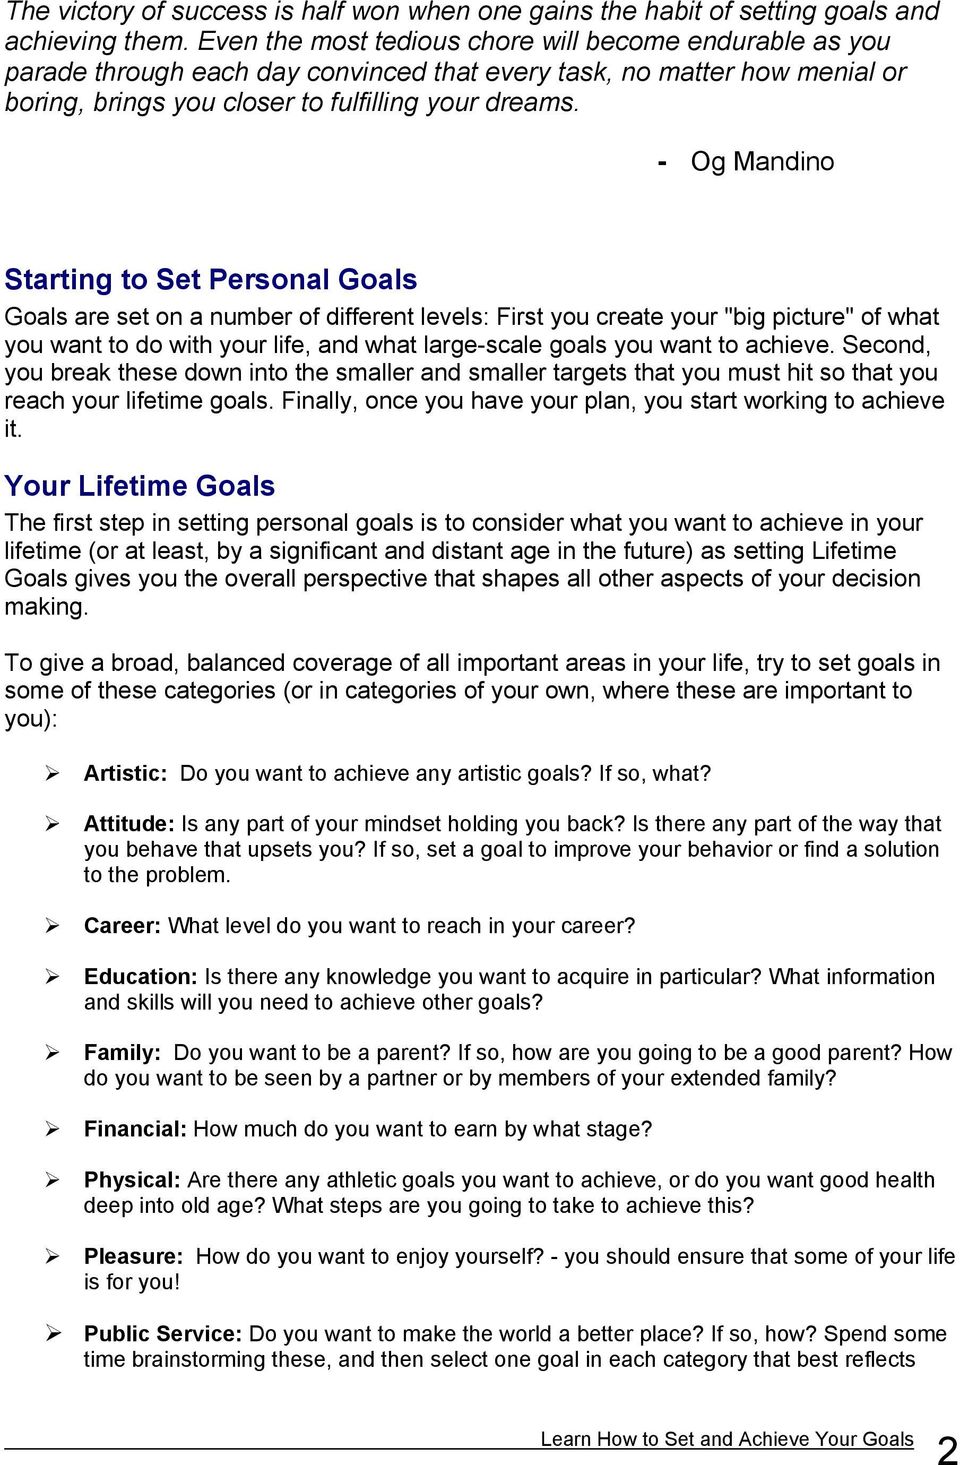 - Og Mandino Starting to Set Personal Goals Goals are set on a number of different levels: First you create your "big picture" of what you want to do with your life, and what large-scale goals you